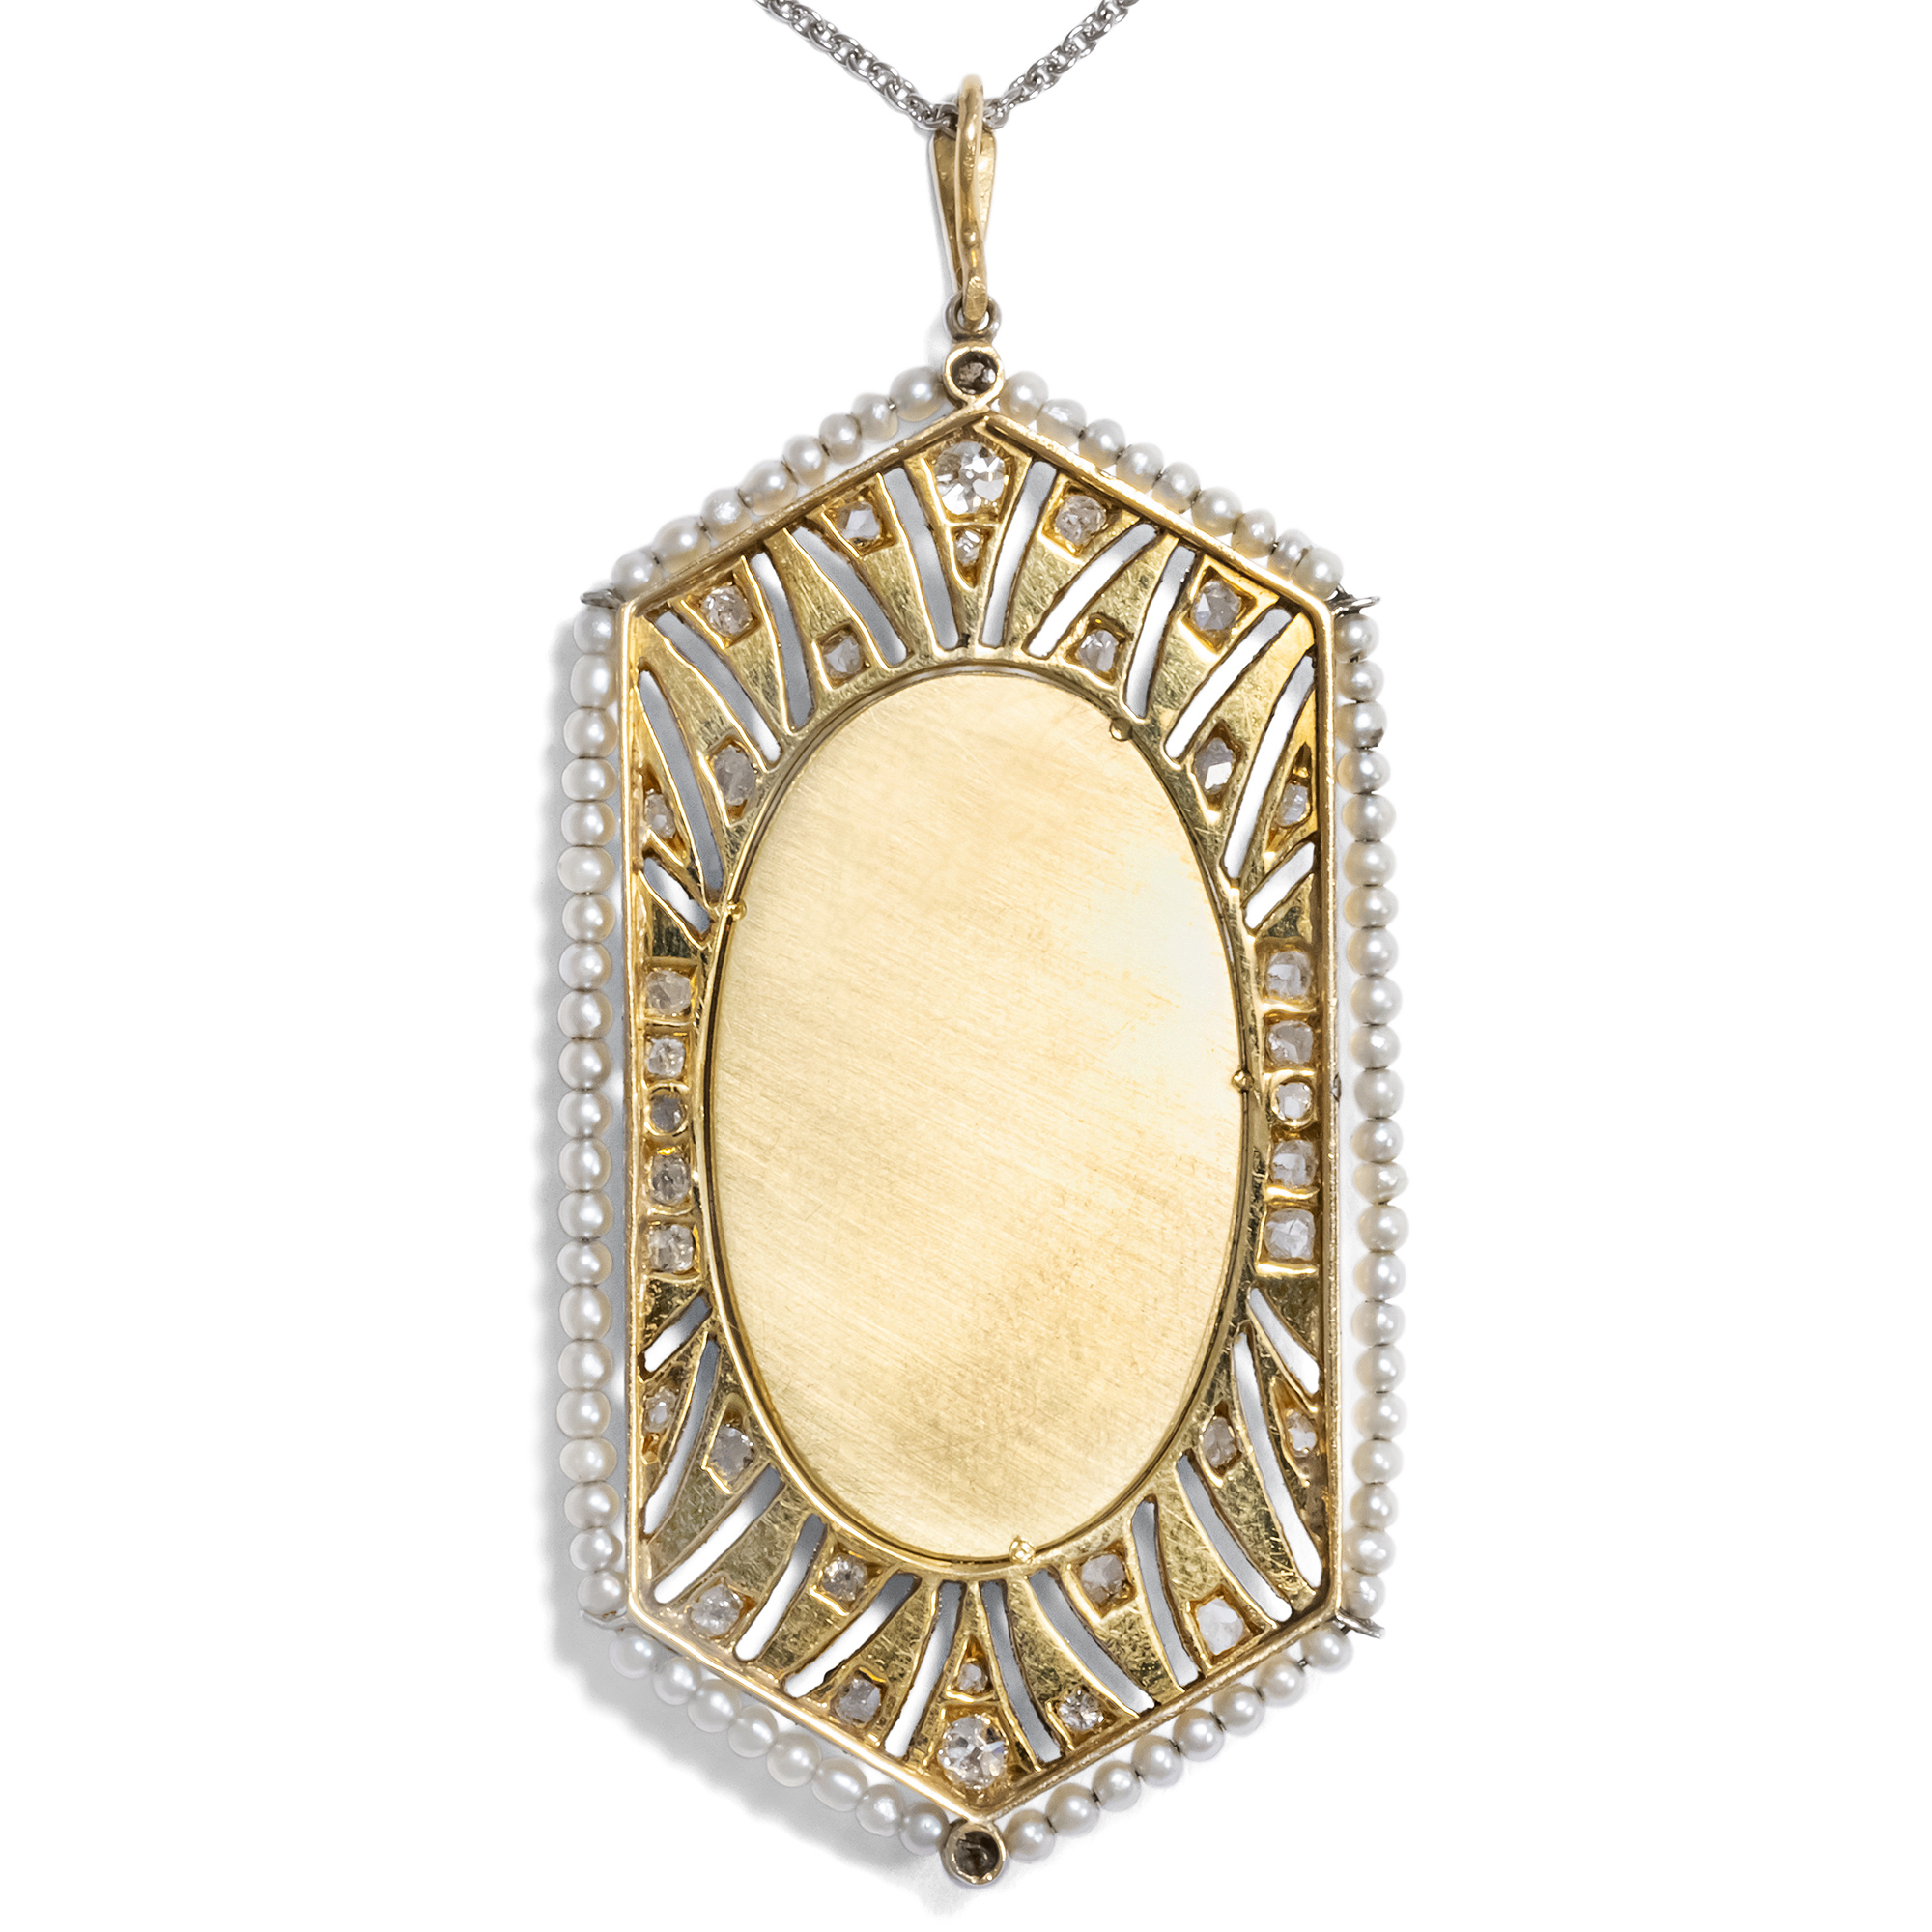 Salvaged Vintage Opal Pendant Necklace in Silver and Gold - Salvaged